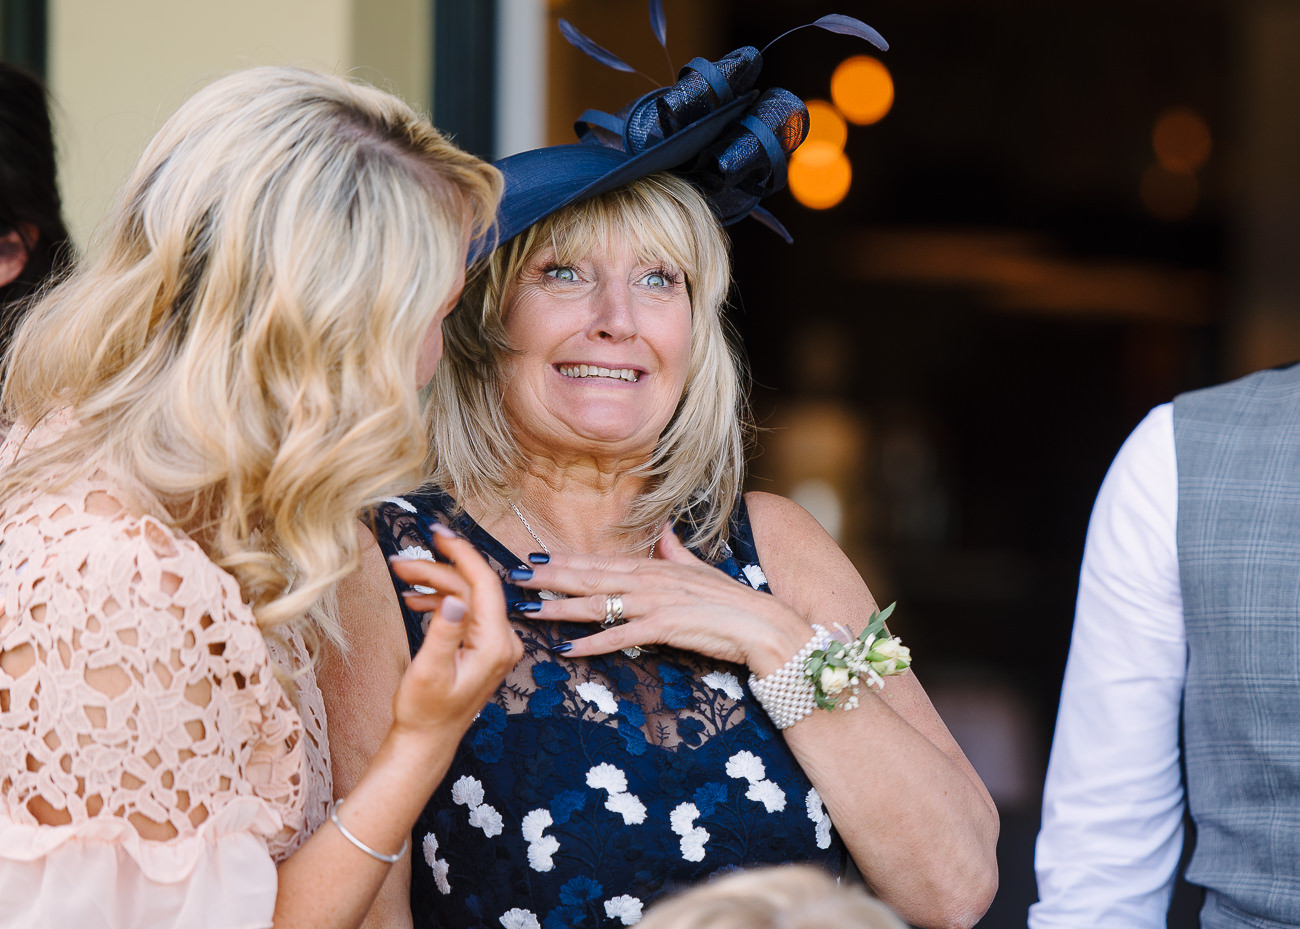 Mother of the groom pulling a face after a guest whispered something in her ear